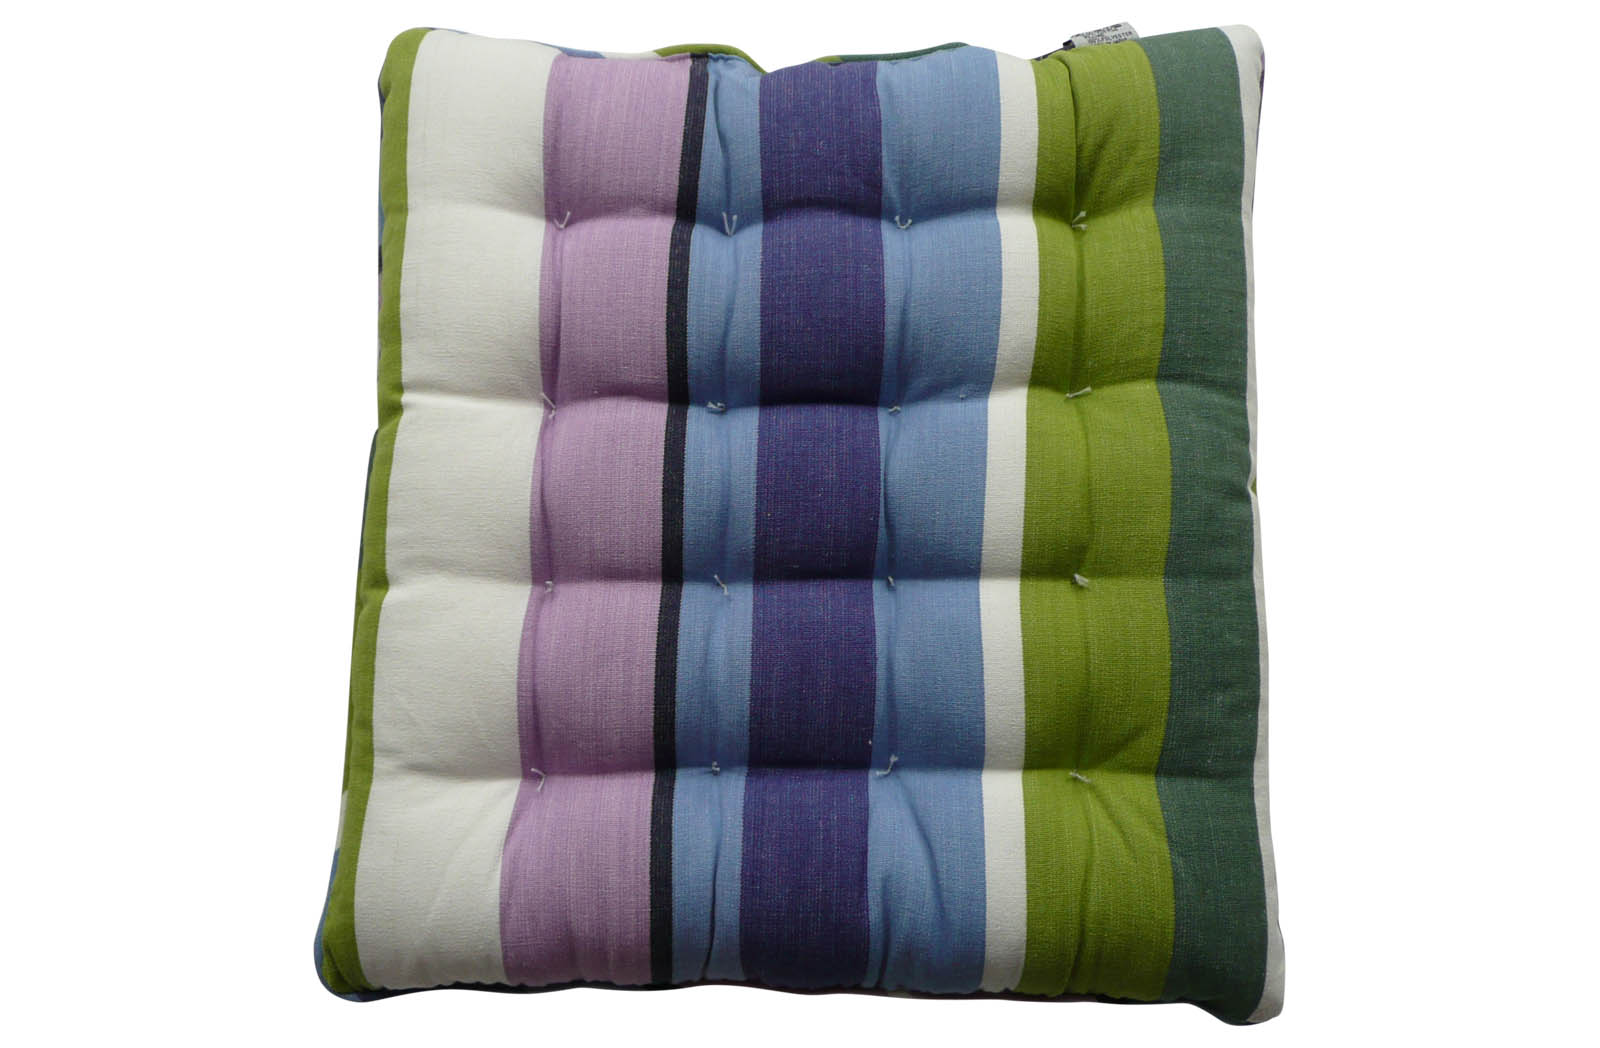 Striped Seat Pads with Piping green, blue, purple   